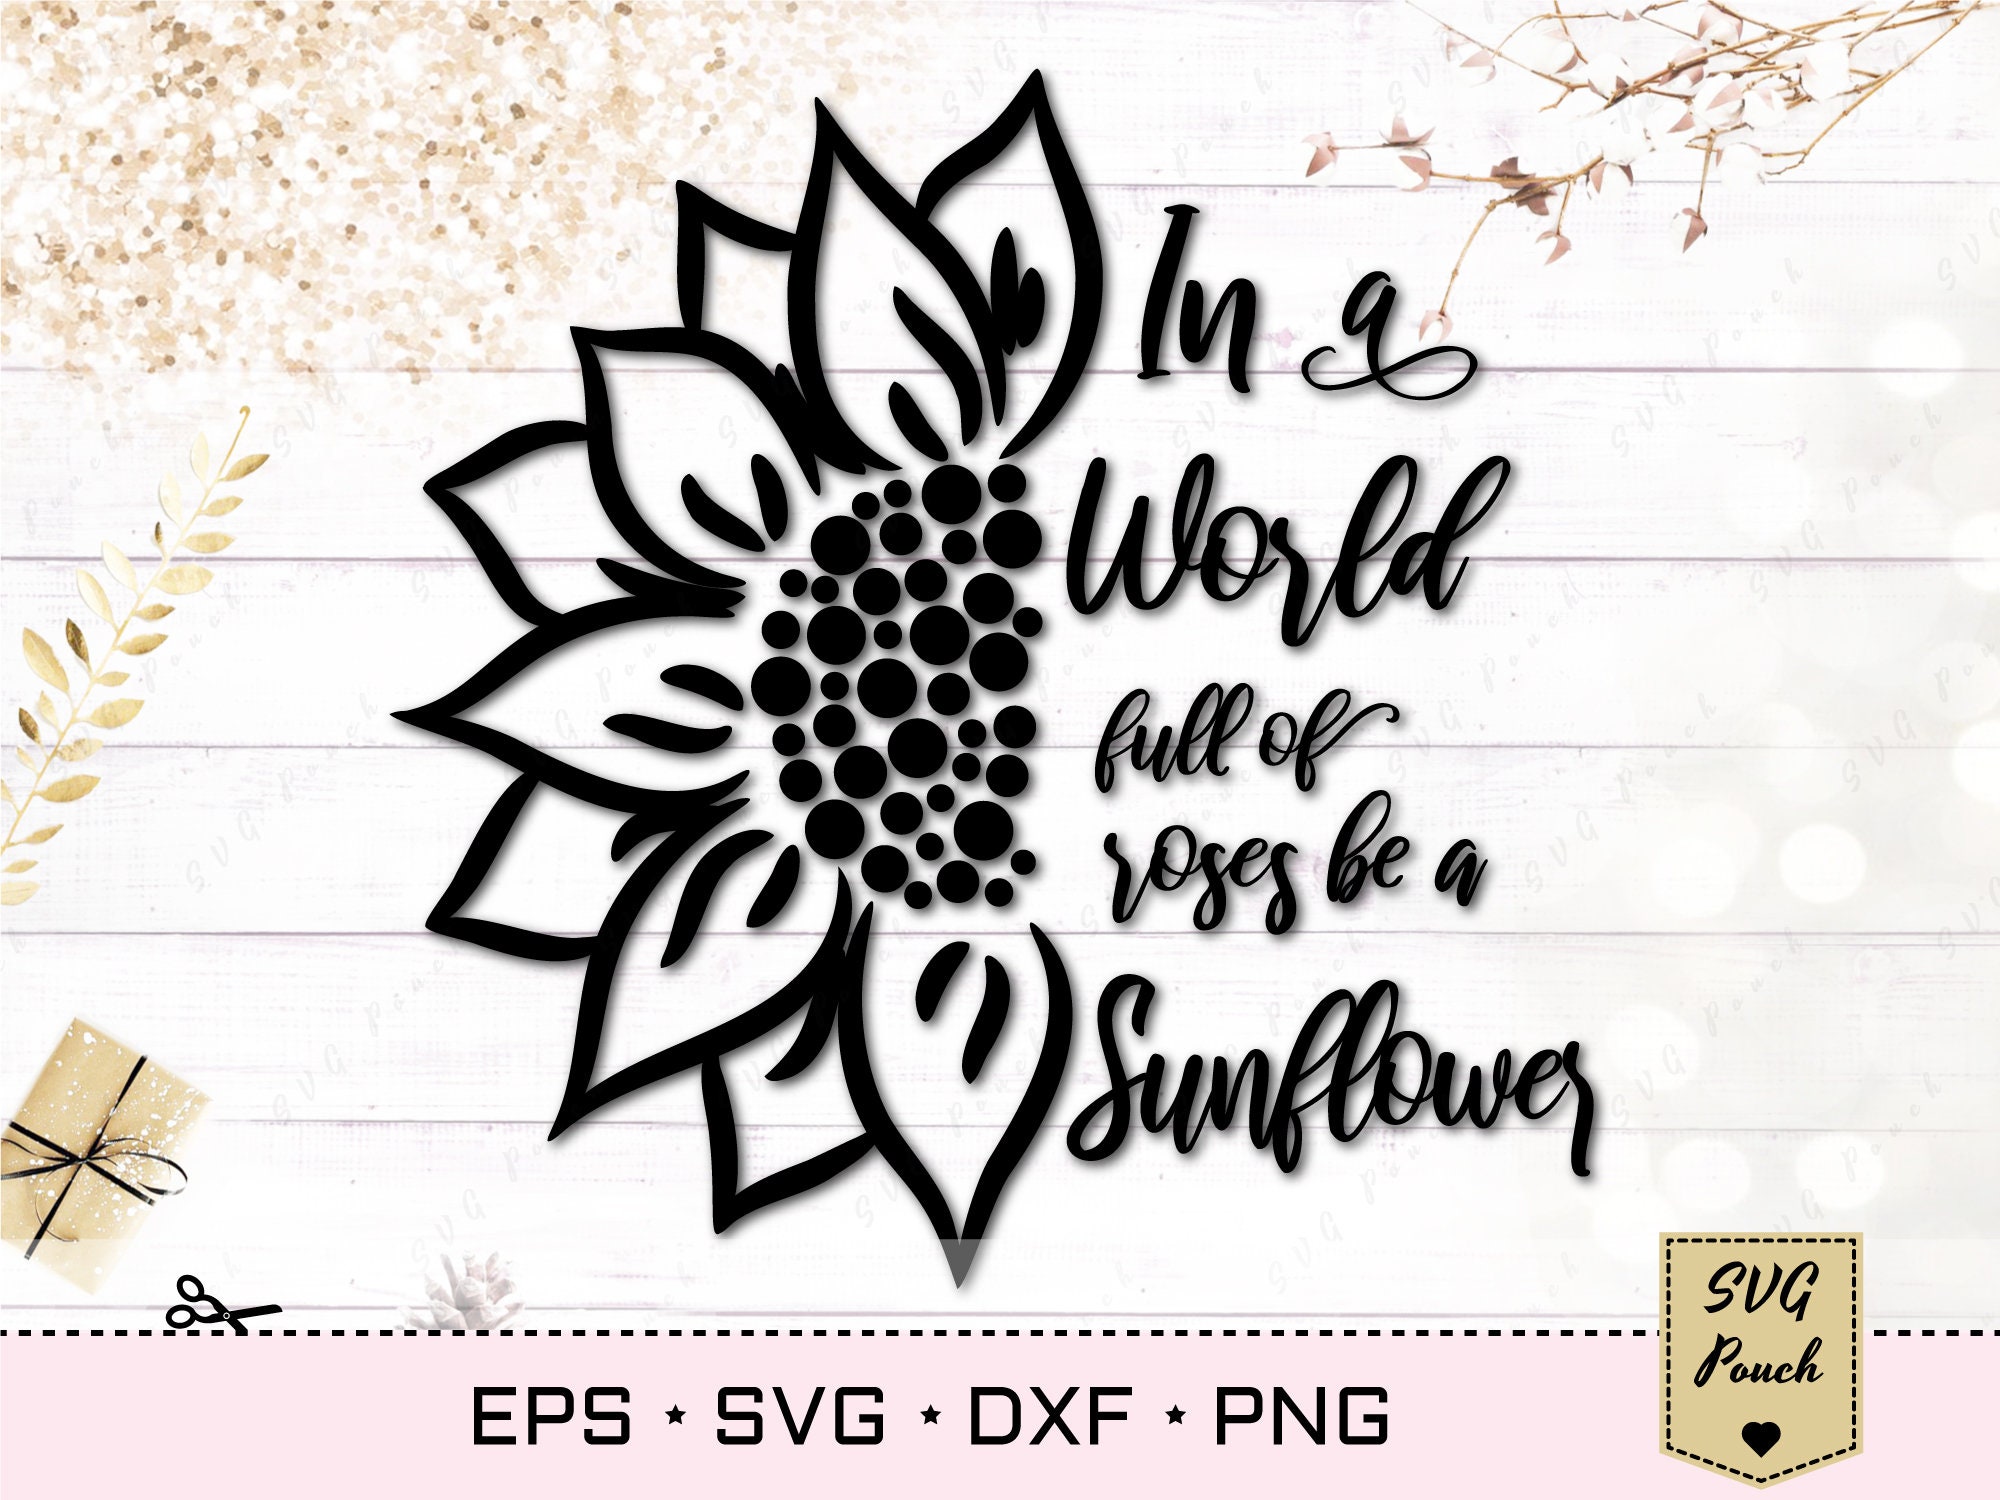 Download Be a Sunflower quote svg Sunflower lettering svg | Etsy